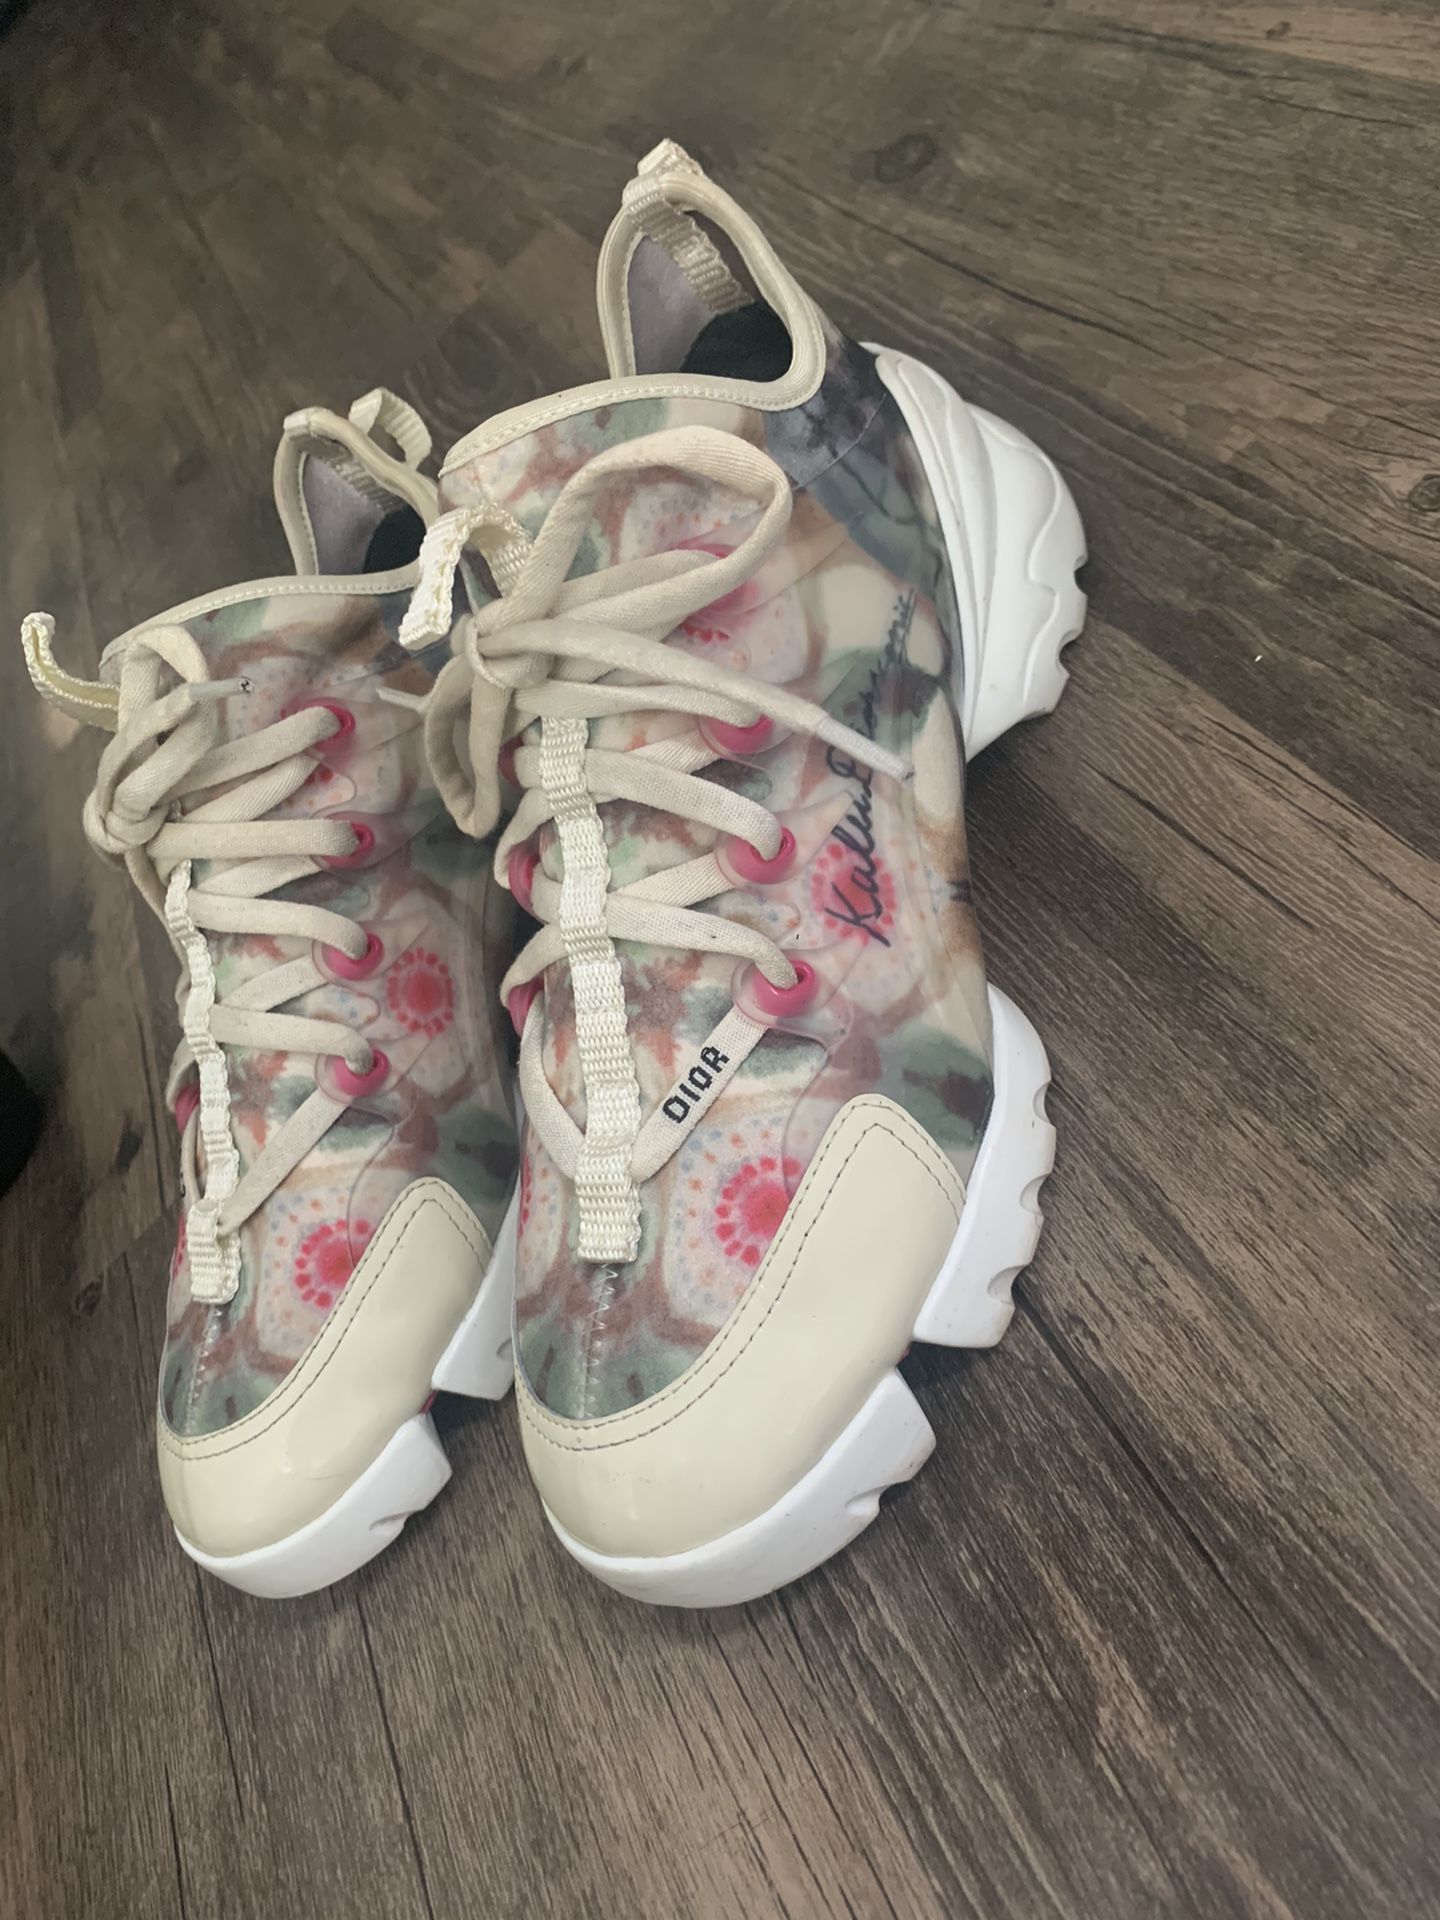 Authentic Dior sneakers